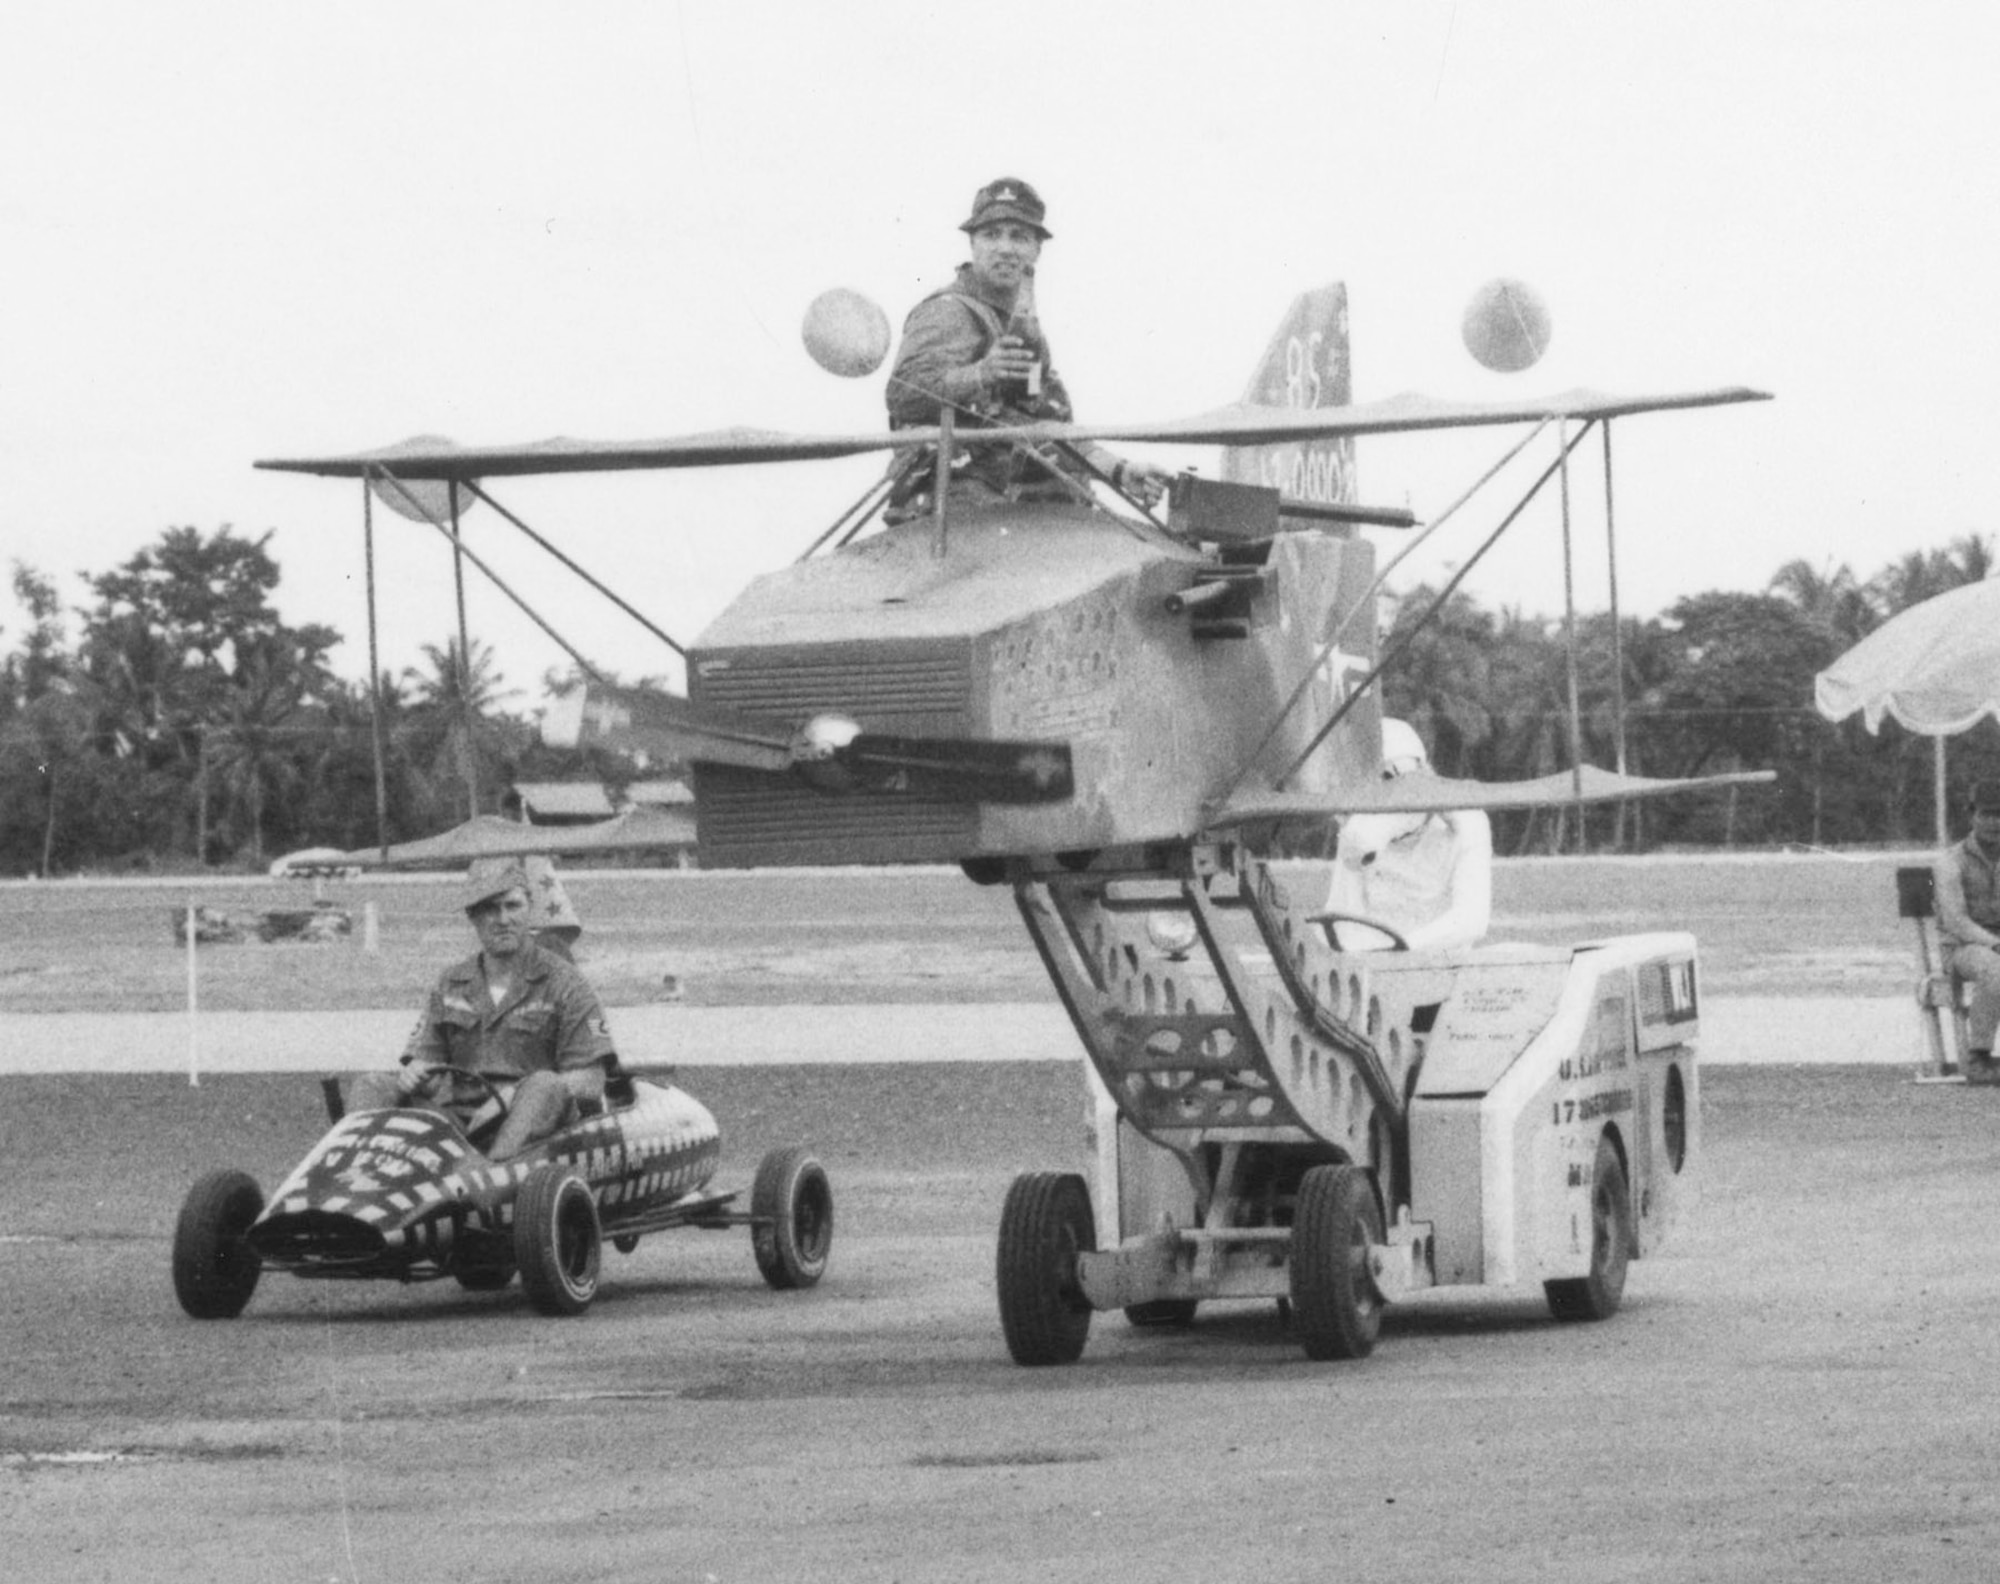 Pictured here are a few of the many funny, creative floats made for the “practice reunion” parades. The “biplane” is sitting on top a bomb loader. (U.S. Air Force photo)